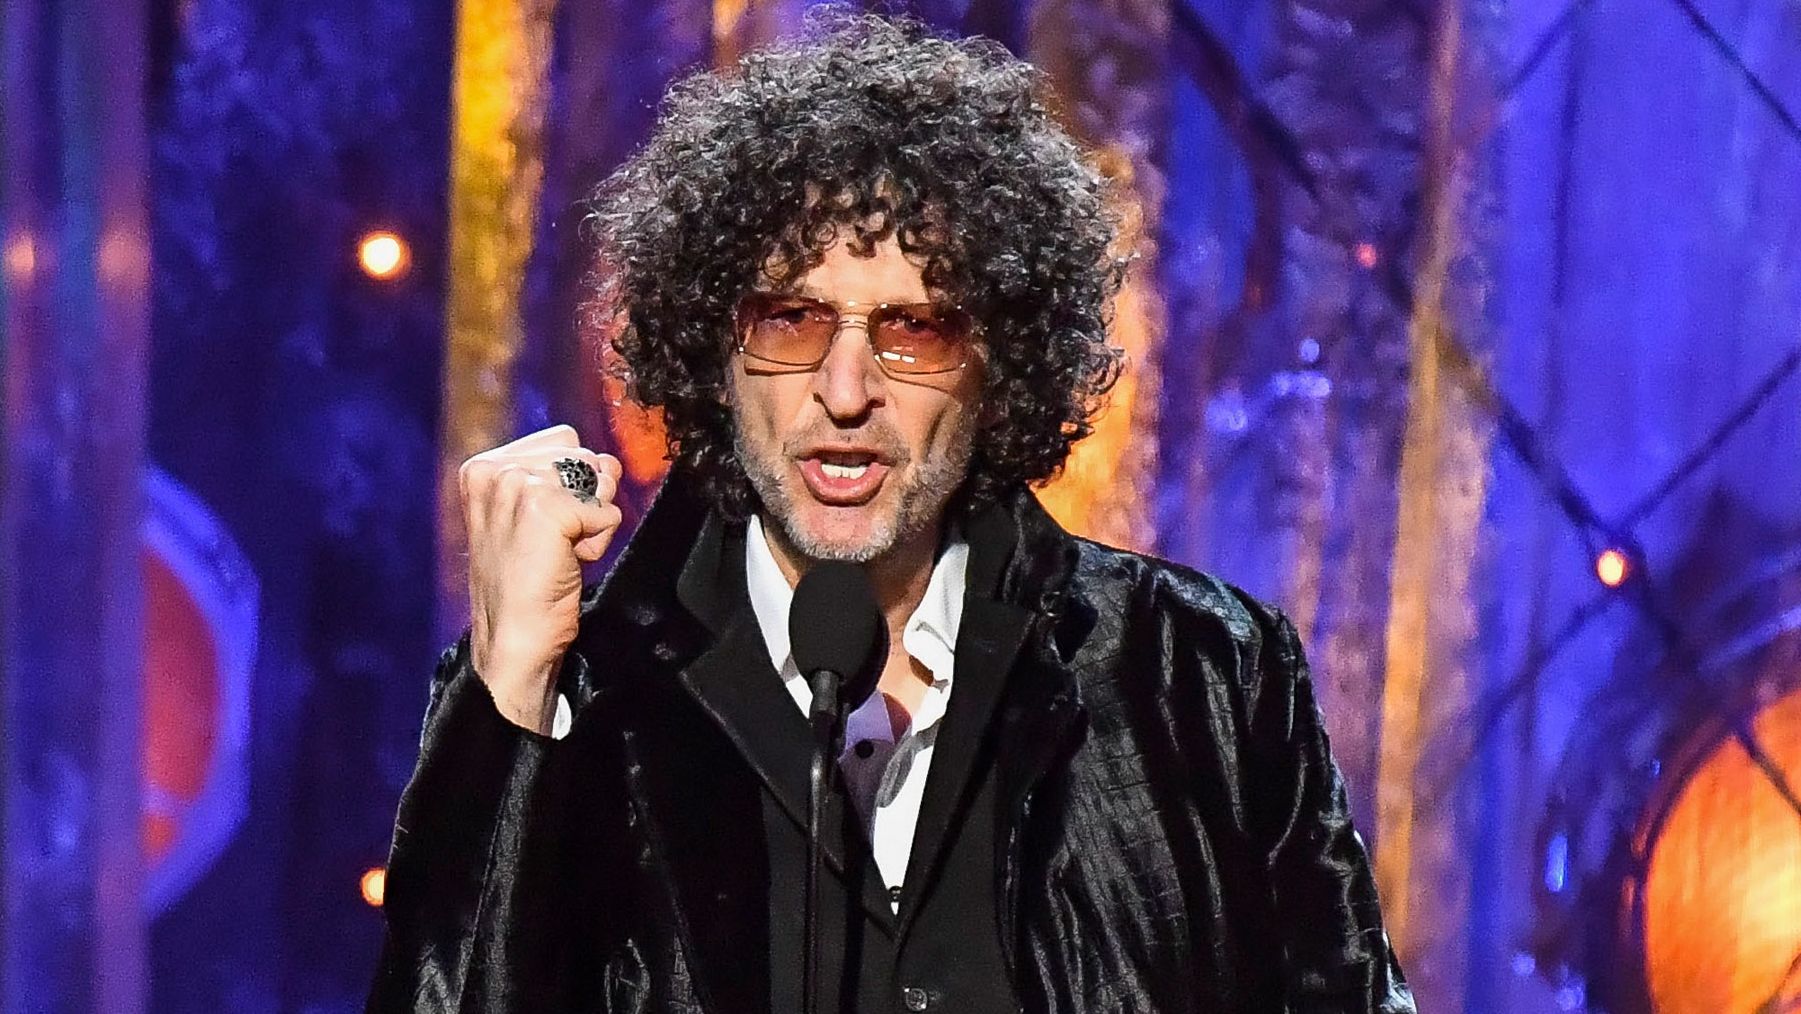 Howard Stern signs 5-year contract extension with Sirius XM - Knotfest.